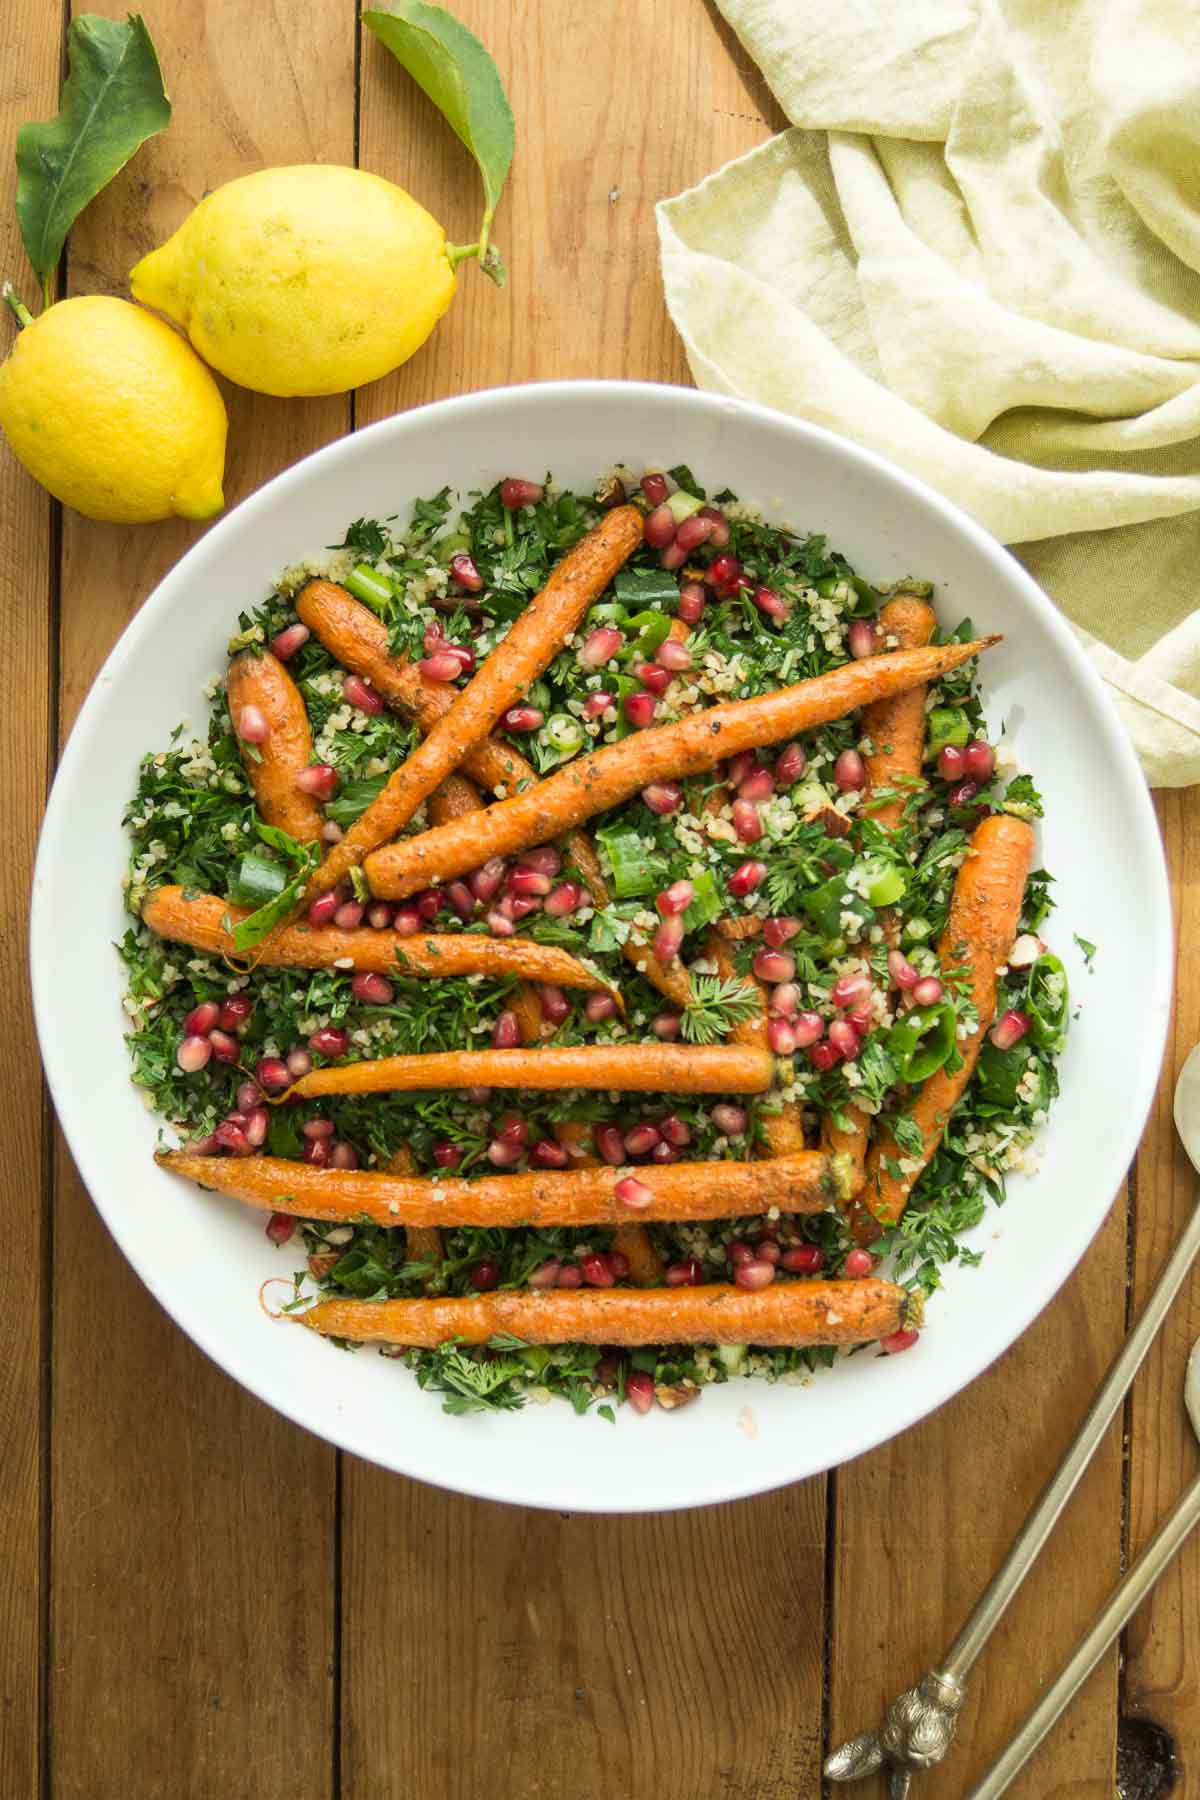 Cumin-Roasted Carrot Tabbouleh with Carrot greens / tops